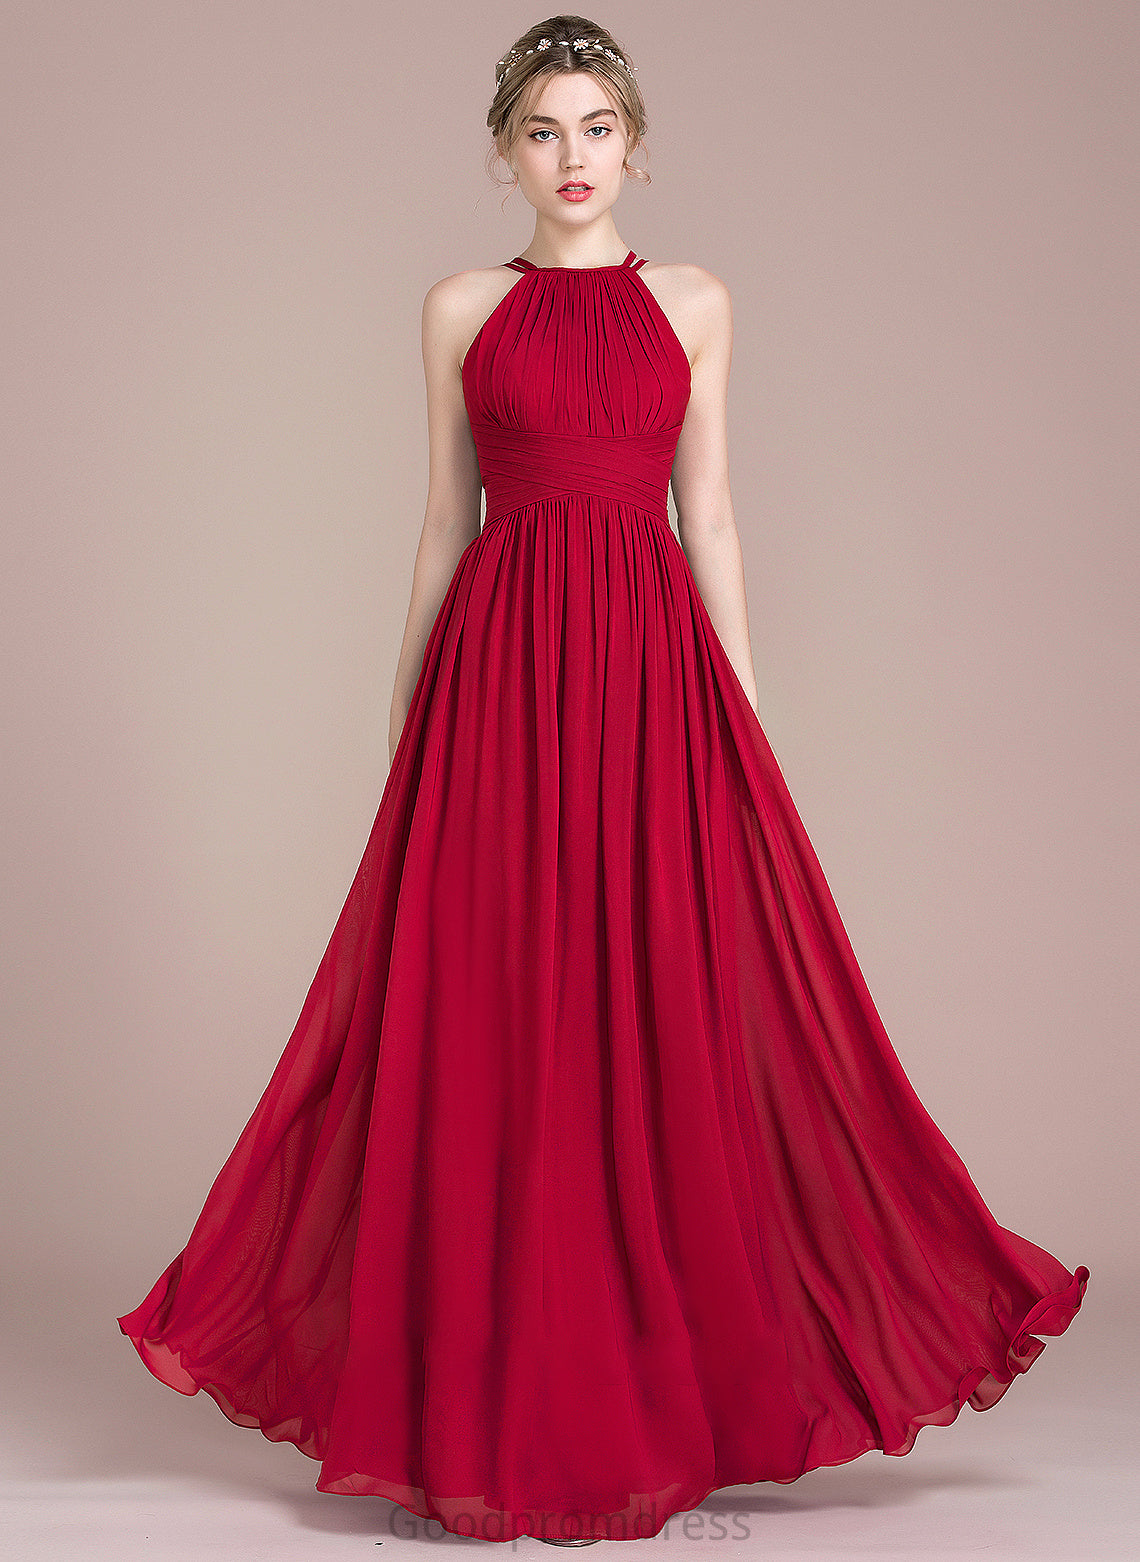 With Floor-Length Gina Prom Dresses A-Line Ruffle Scoop Chiffon Neck